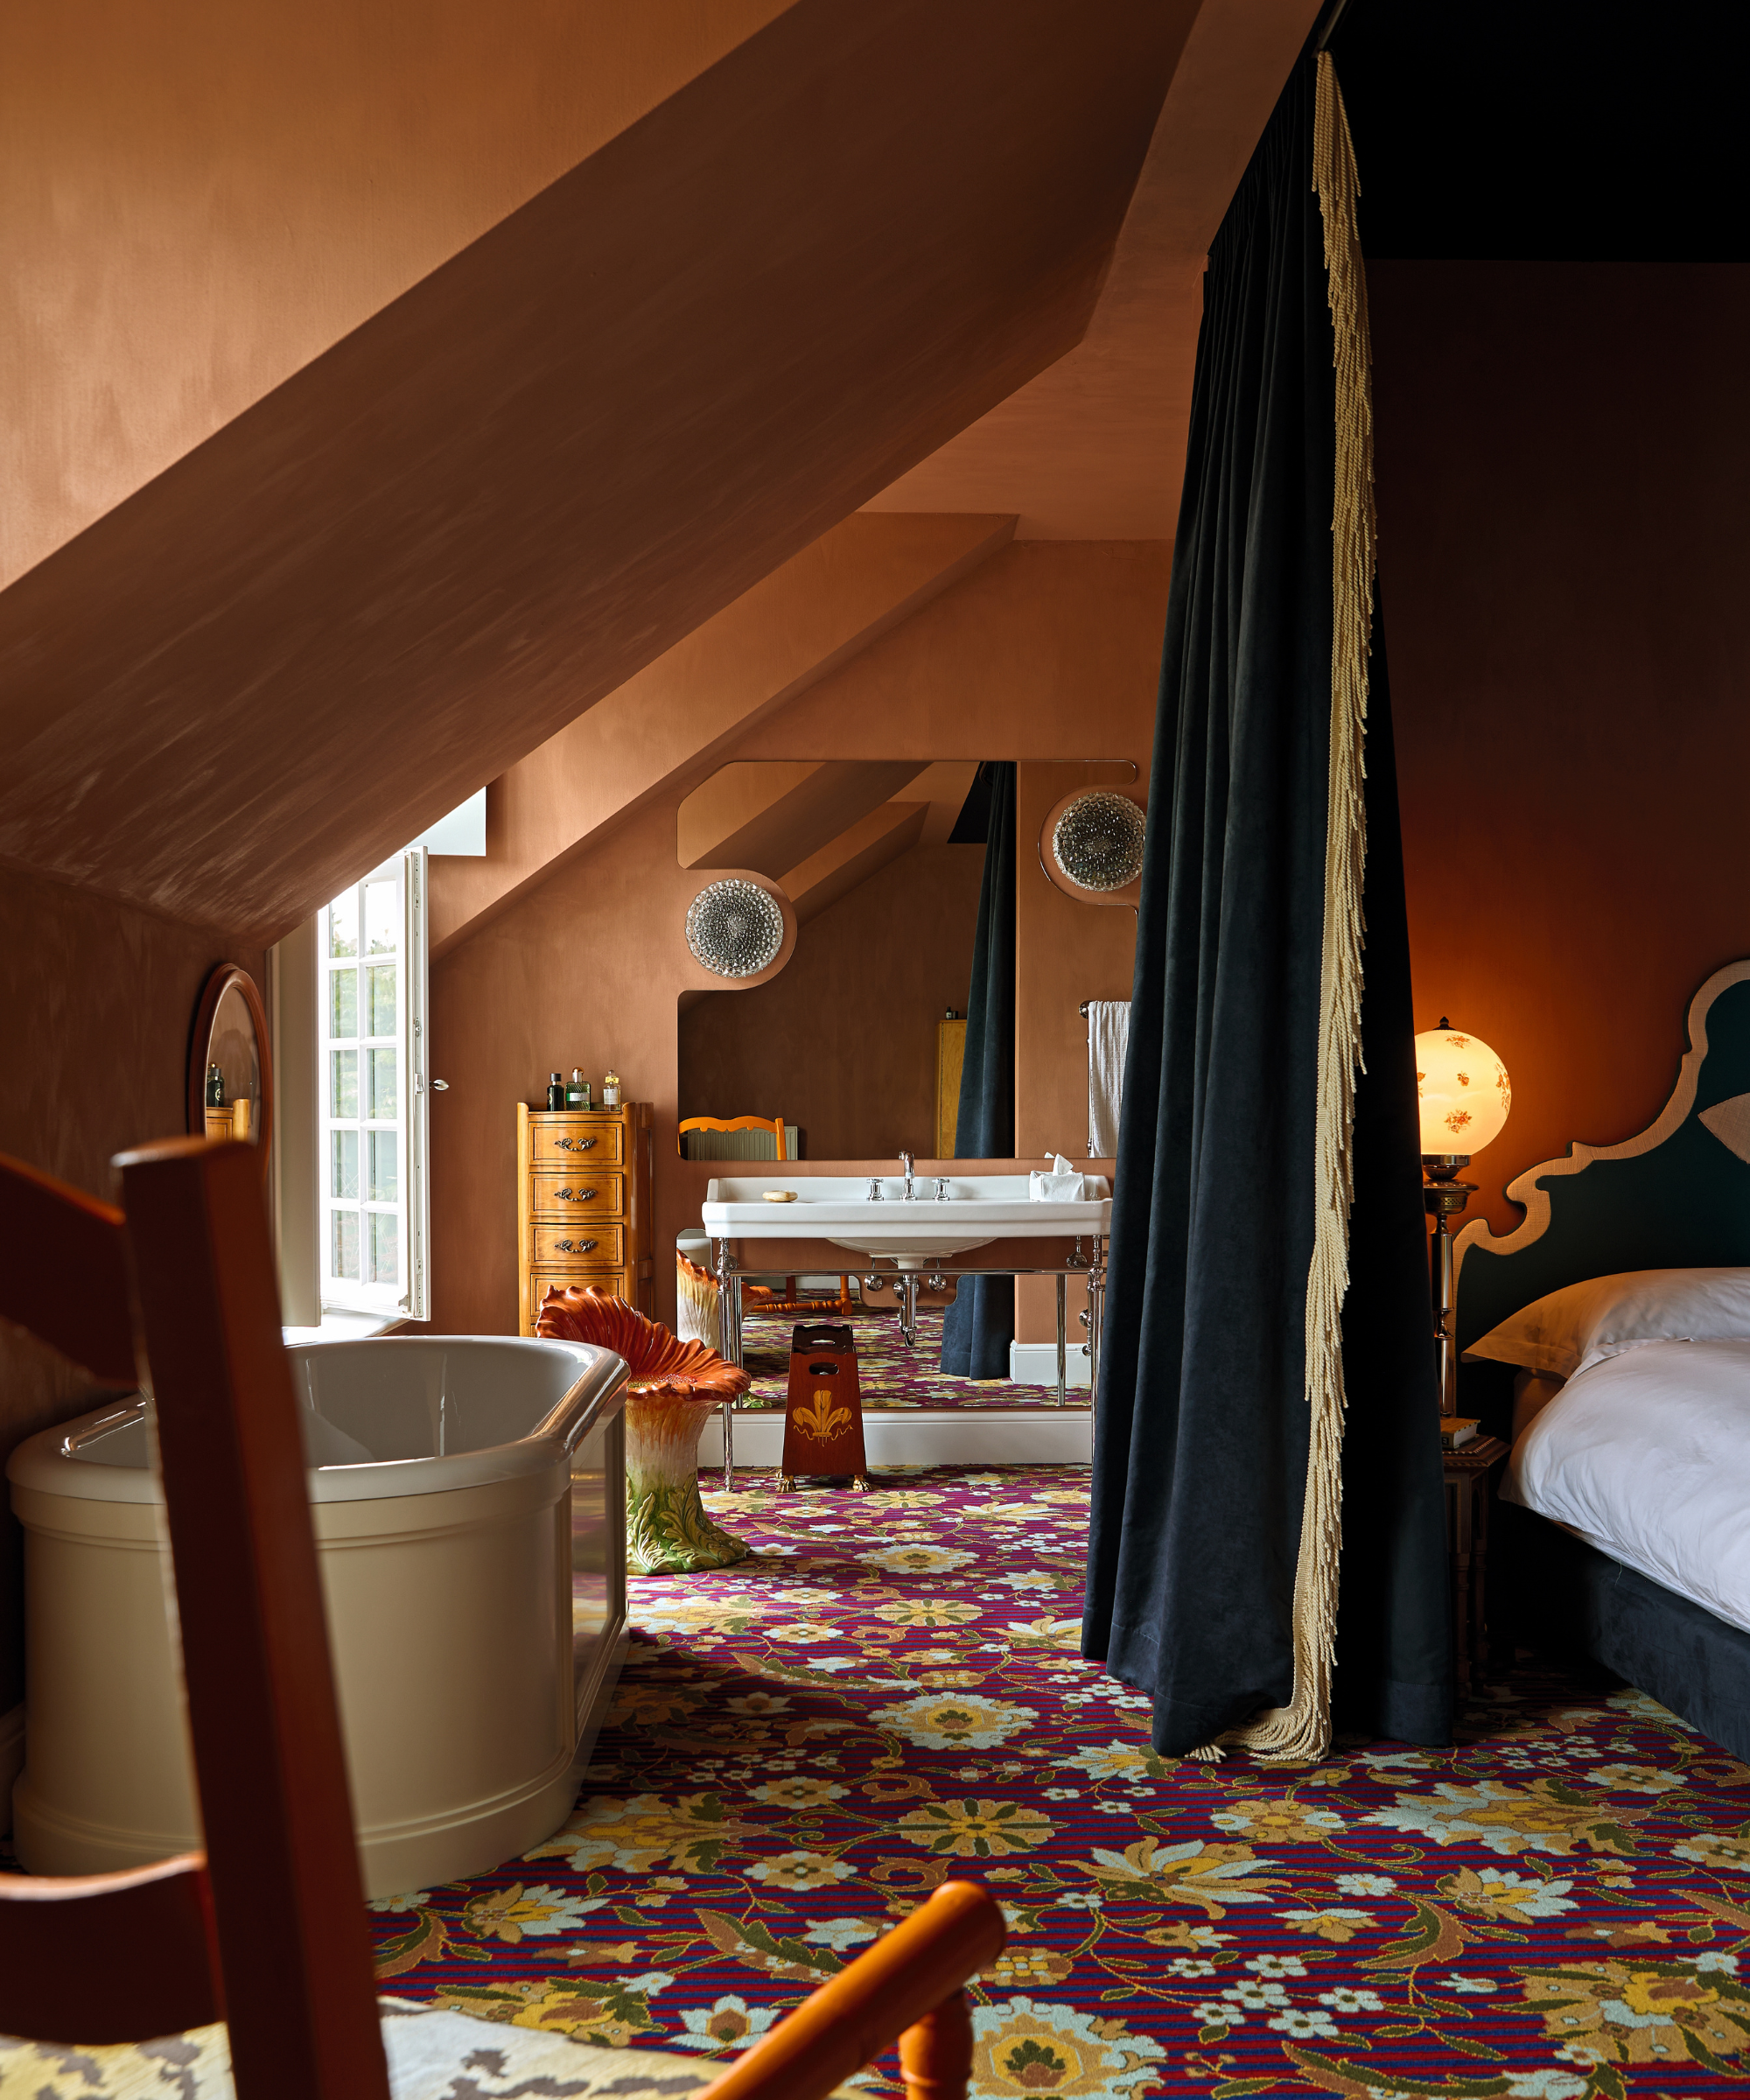 Bedroom in attic with orange walls and bed with navy velvet curtain, patterned floral carpet and bath in room